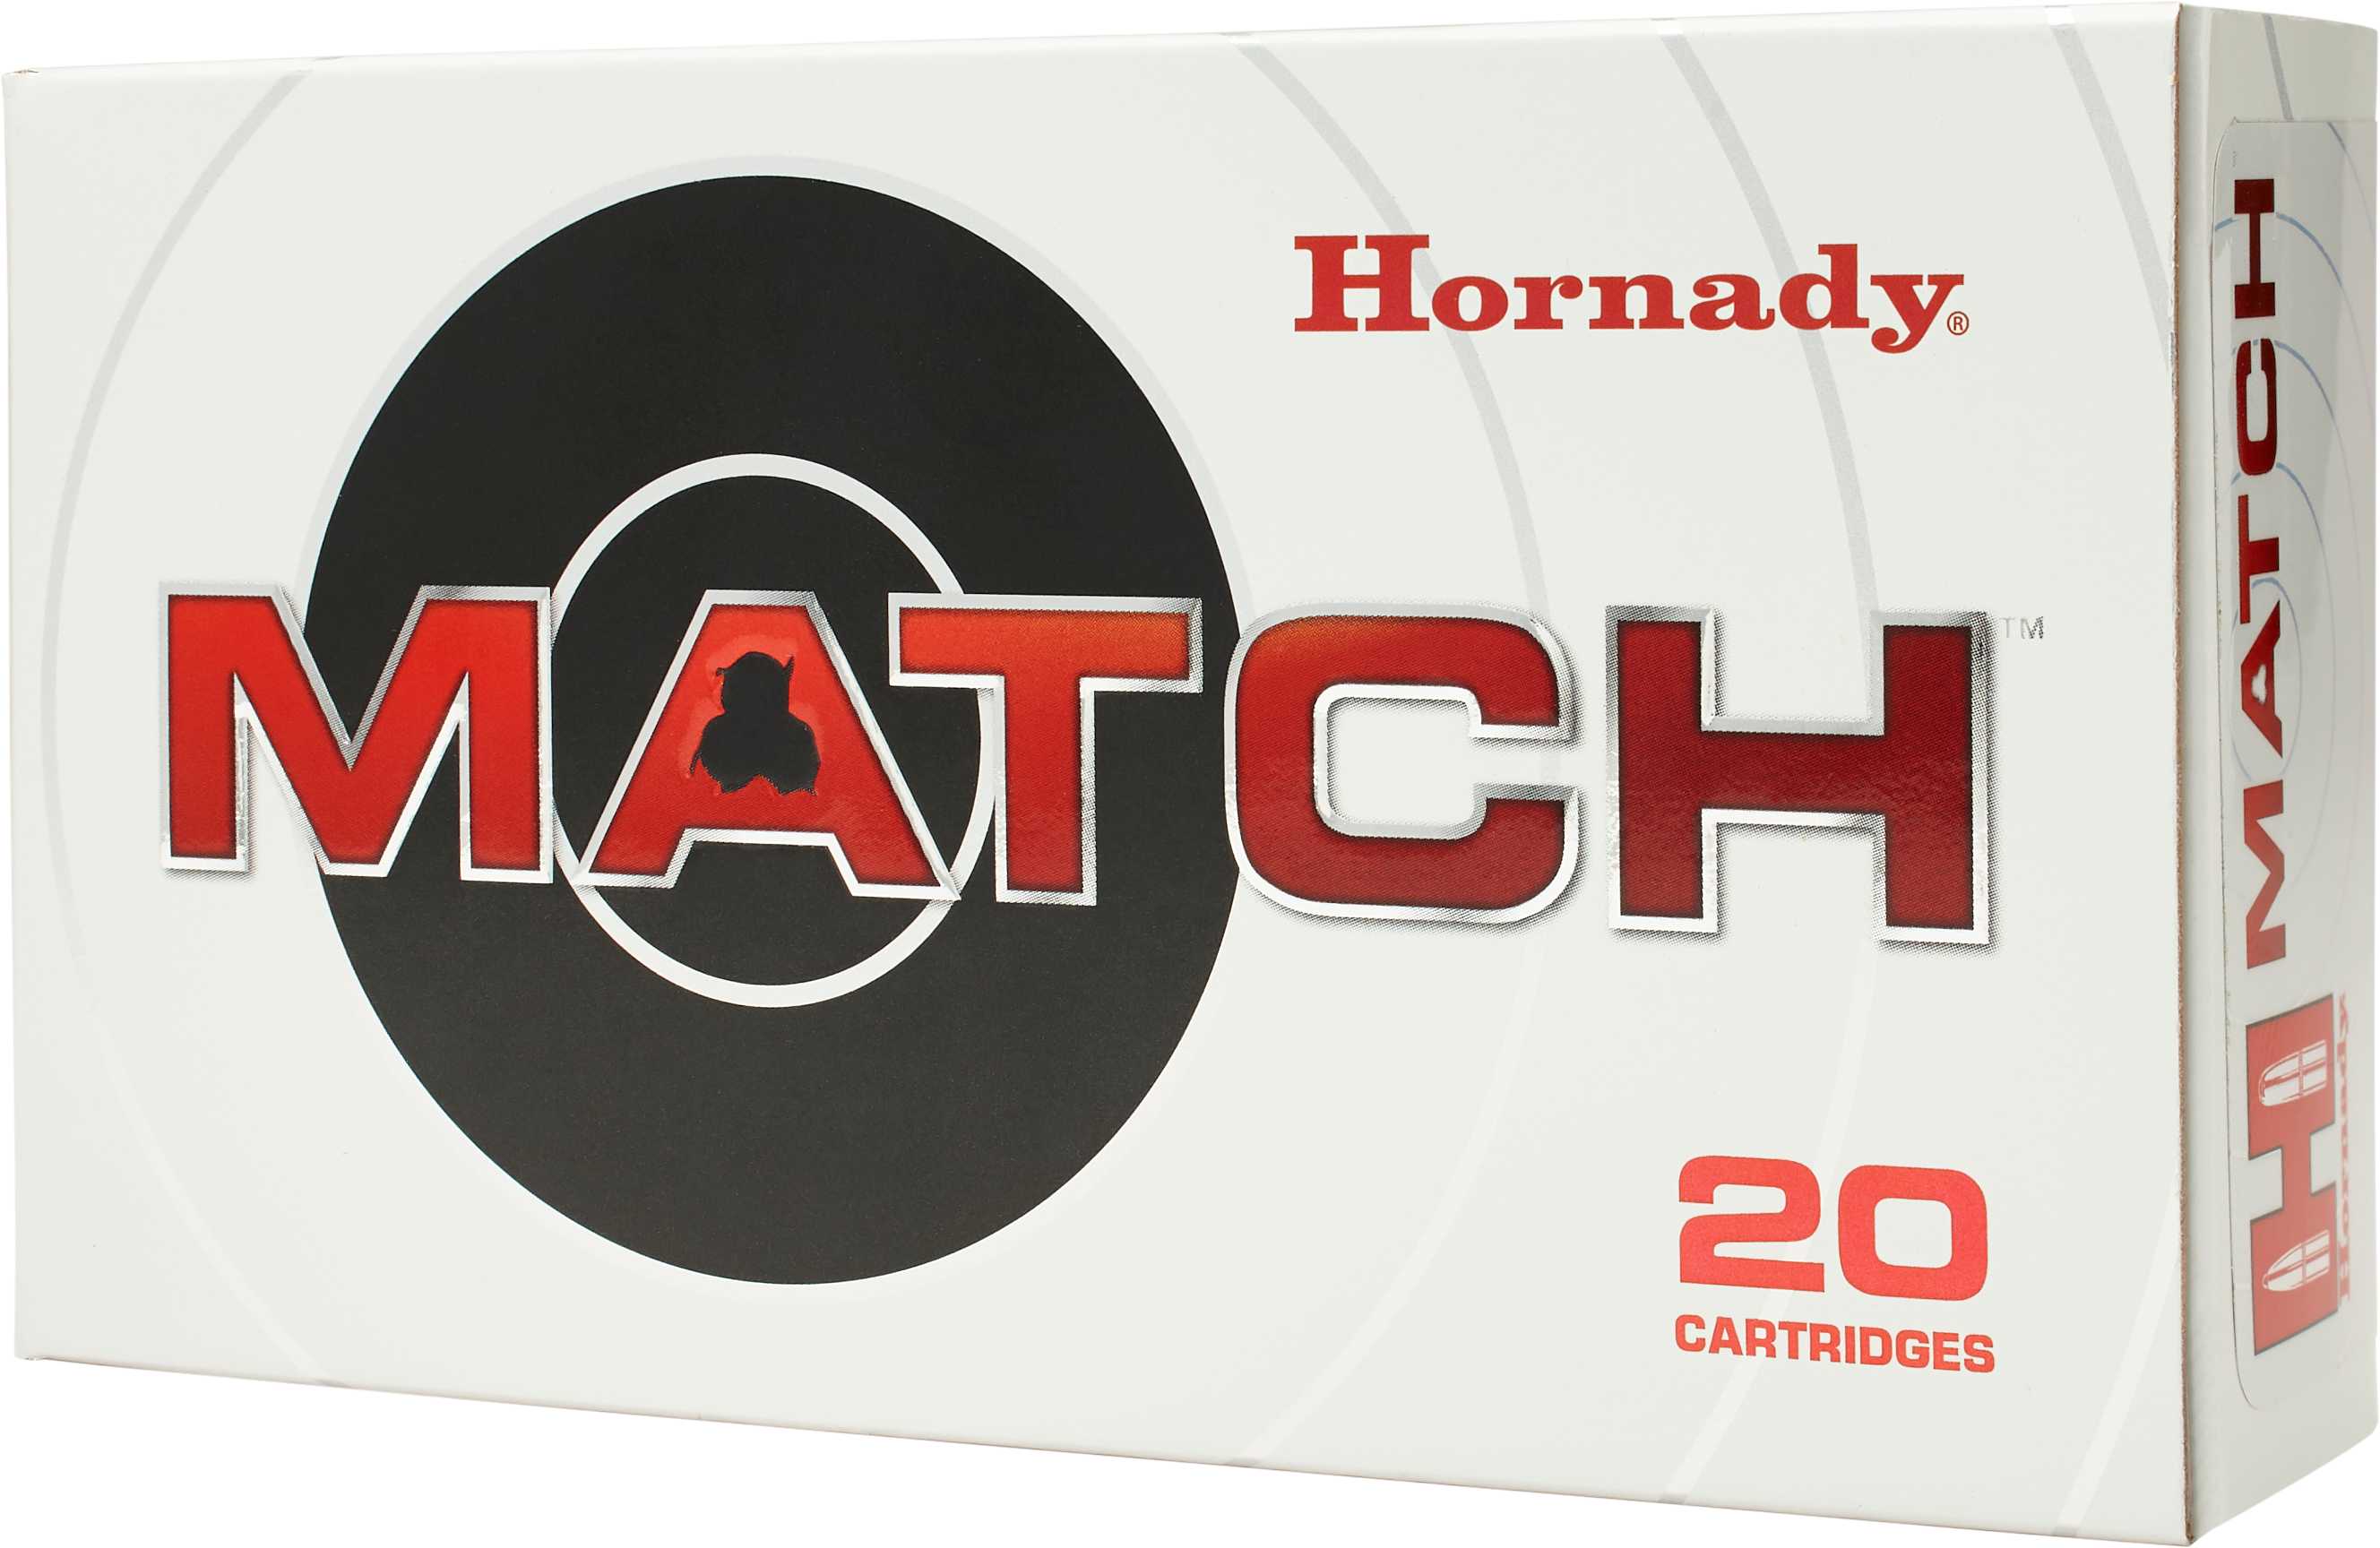 Hornady Match 6.5 Creedmoor 147 gr 2695 fps Extremely Low Drag-Match (ELD-M) Ammo 20 Round Box